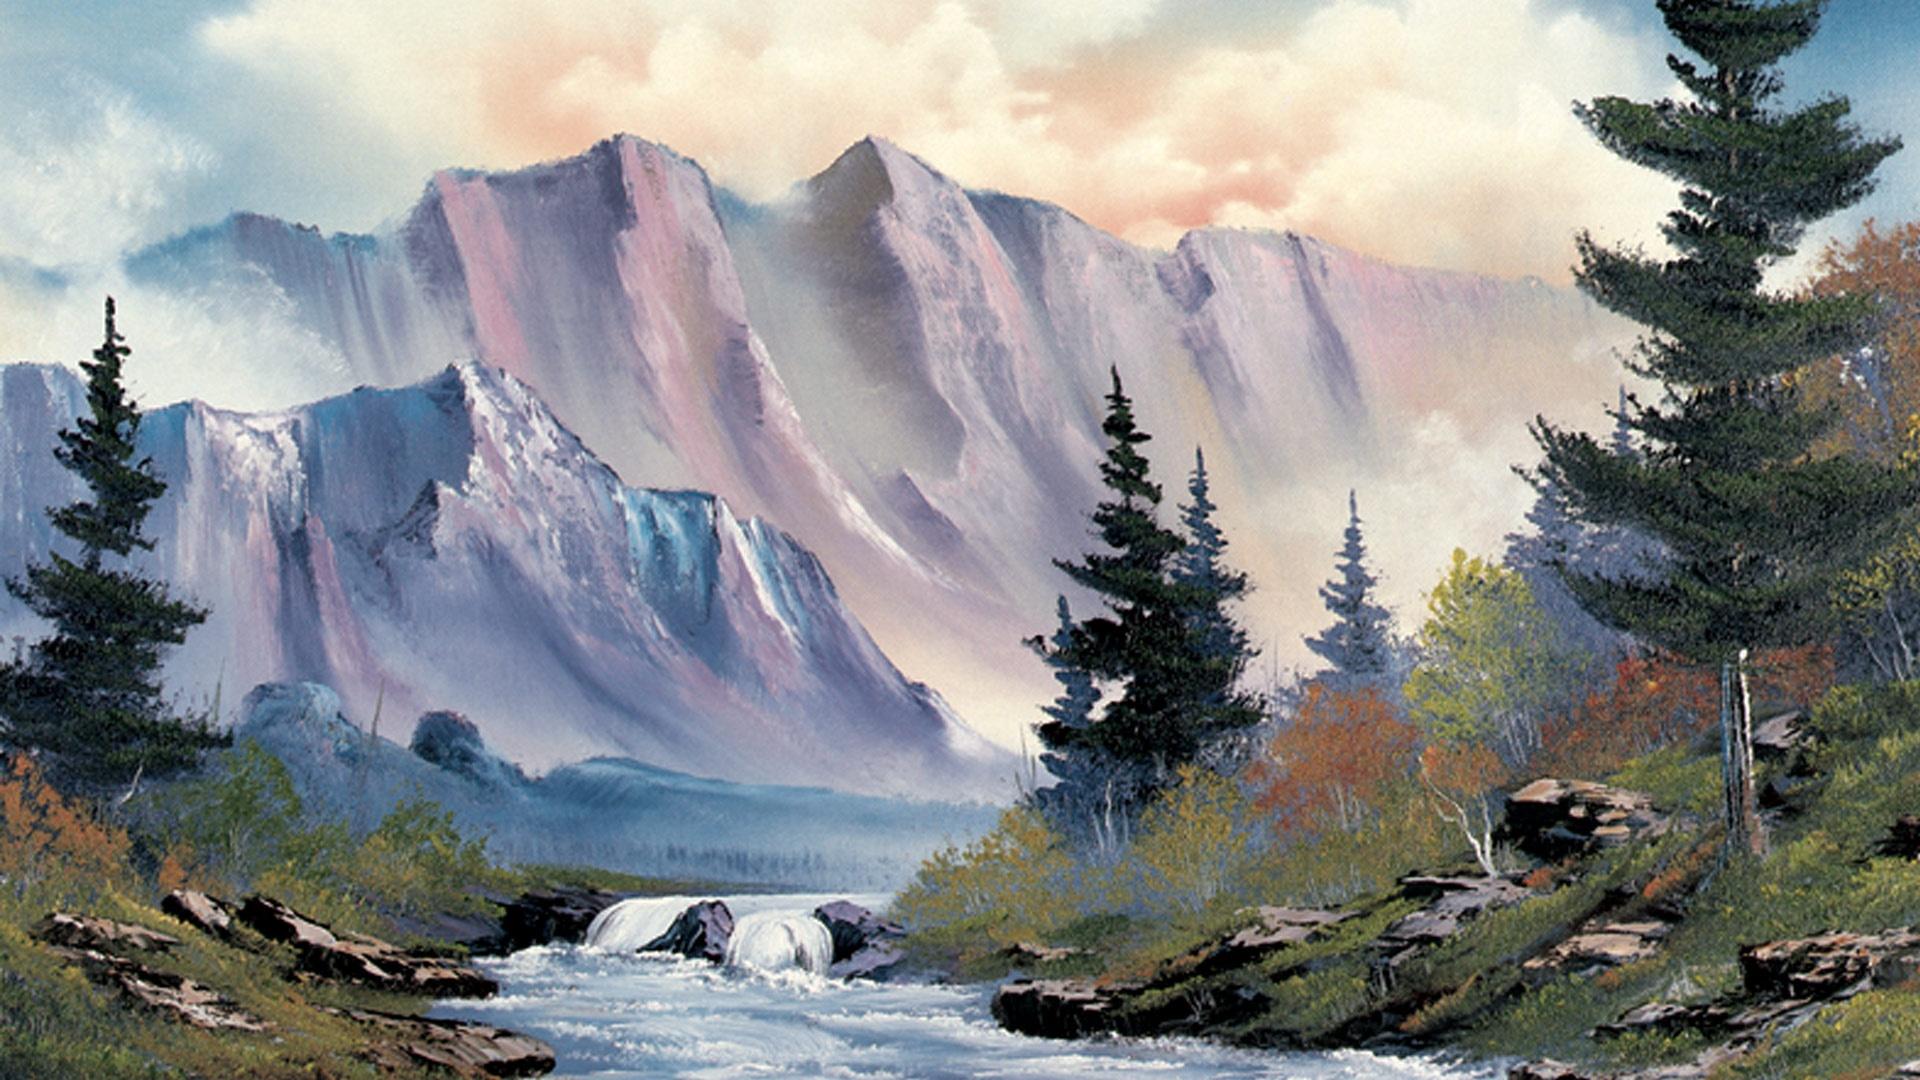 Misty Mountain Morning - Best of the Joy of Painting